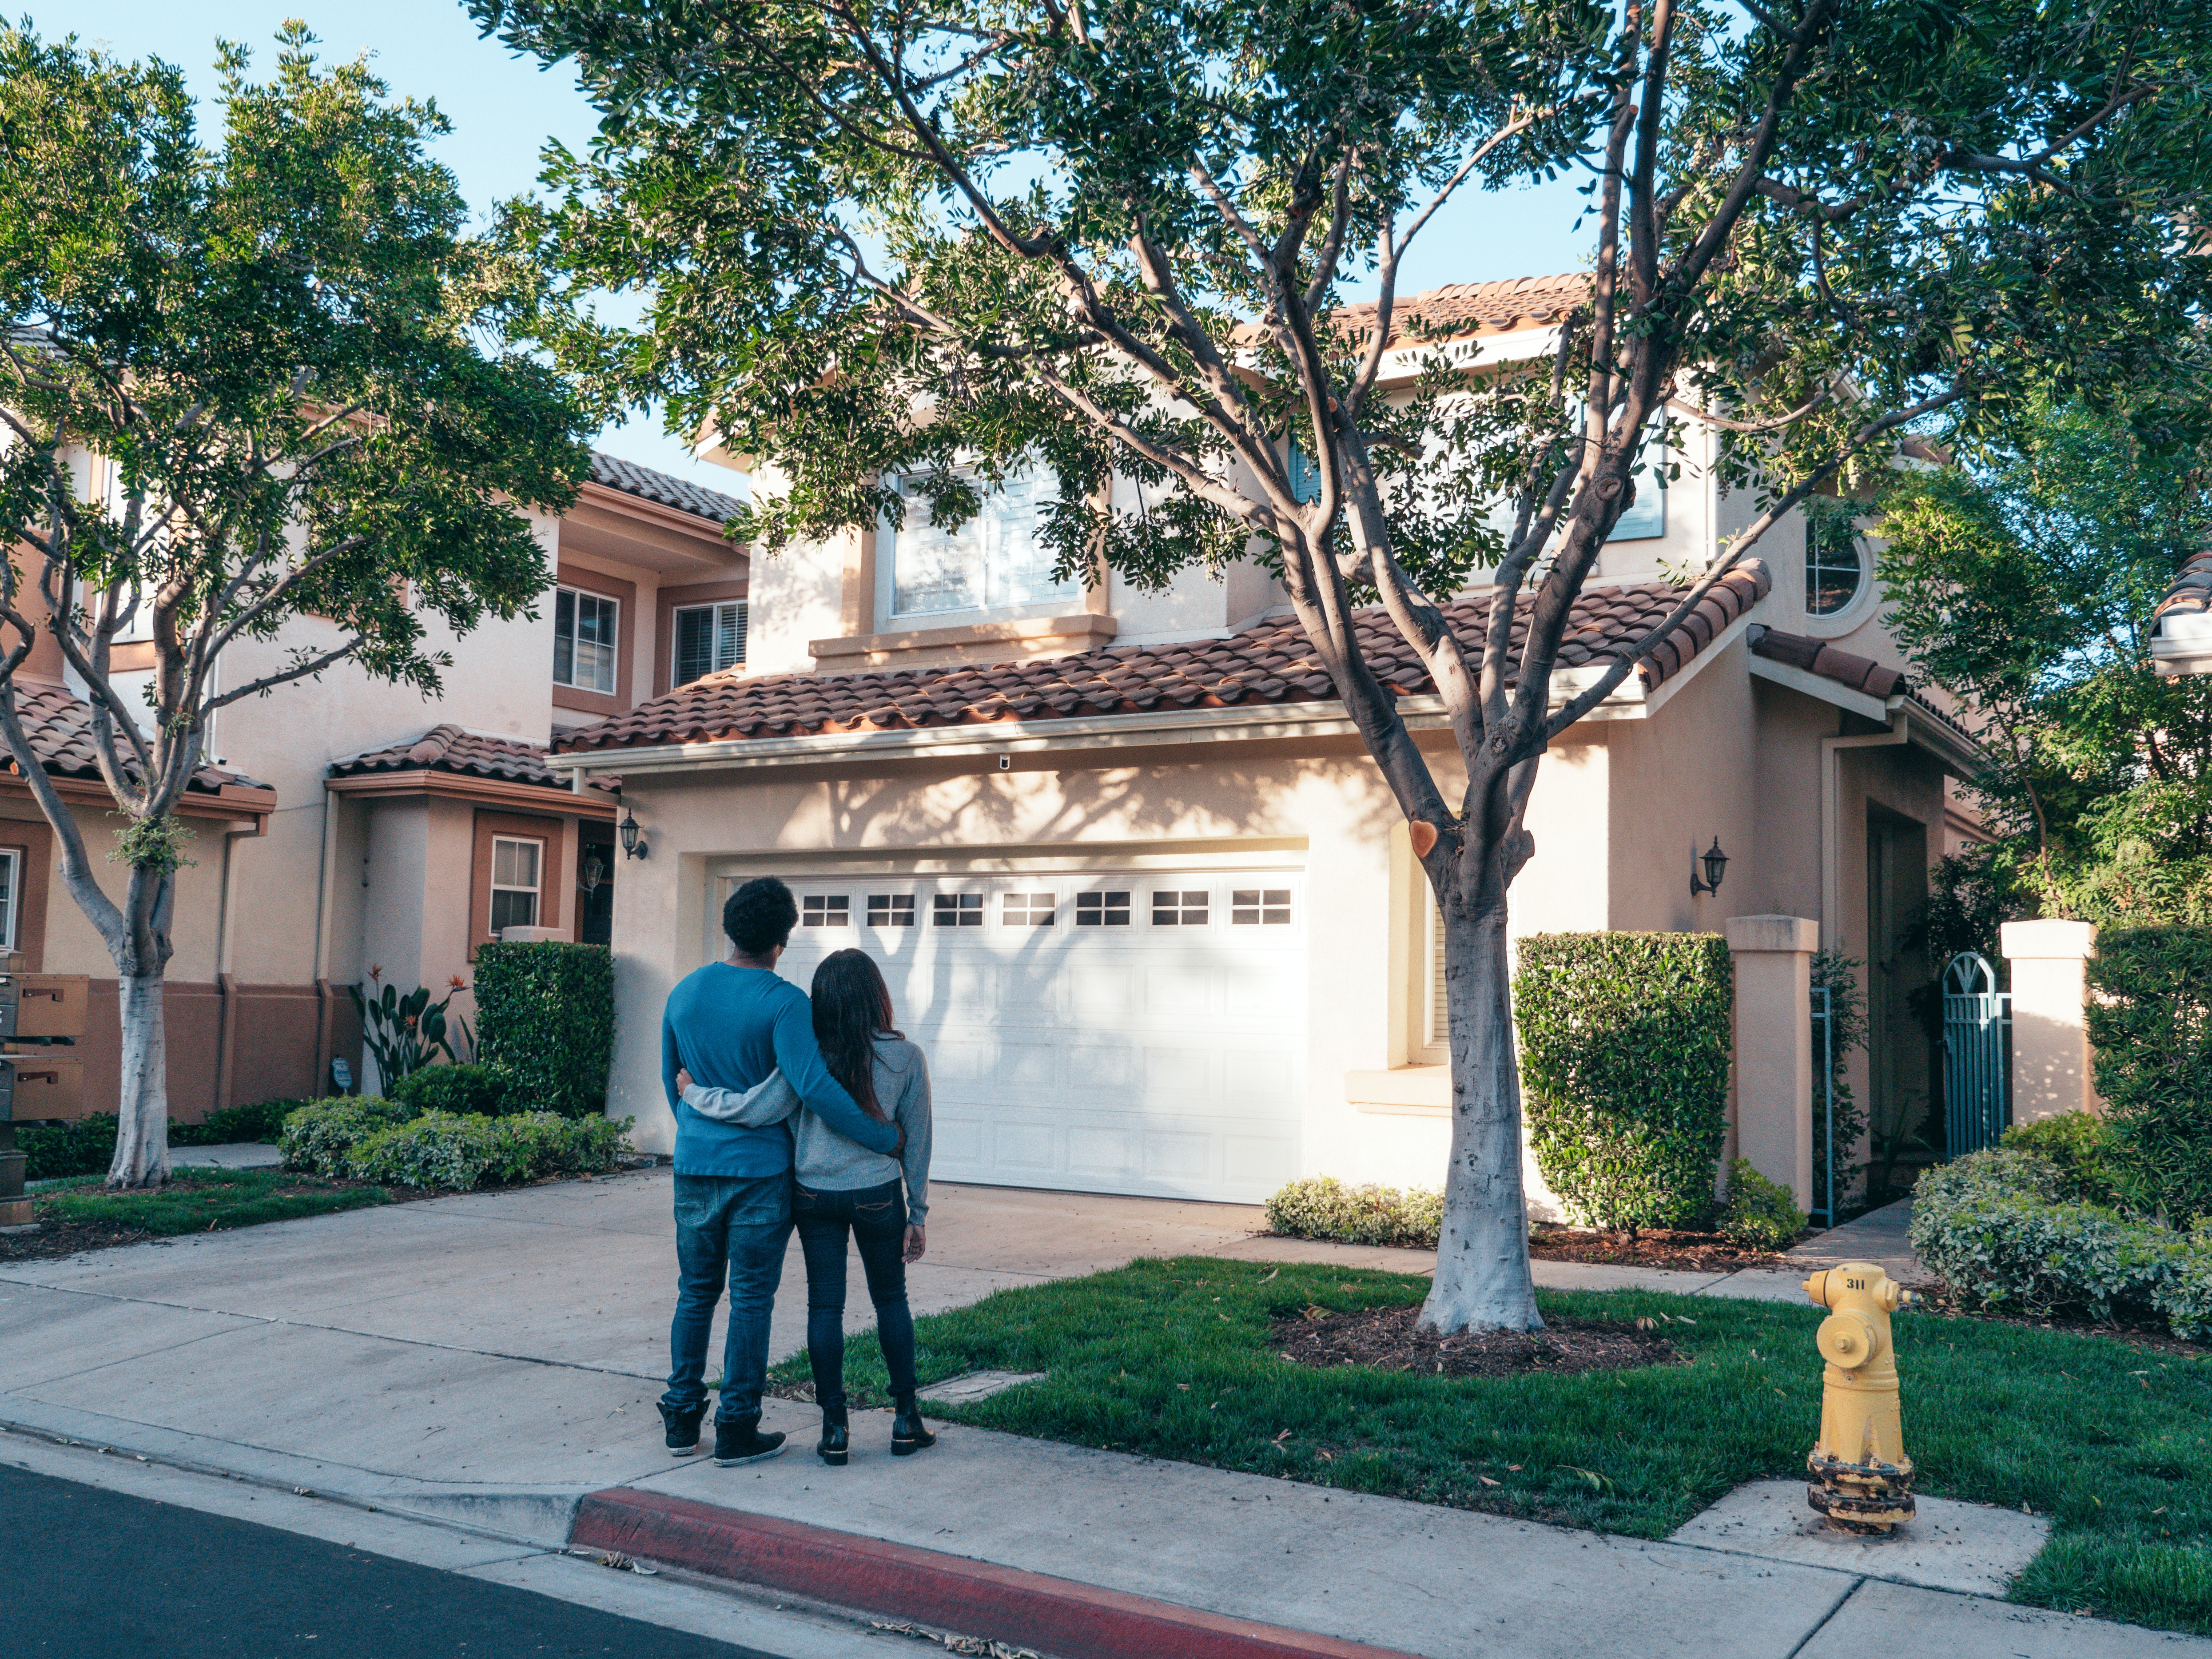 The New California program for first-time homebuyers will let you borrow a down payment at 0% interest!